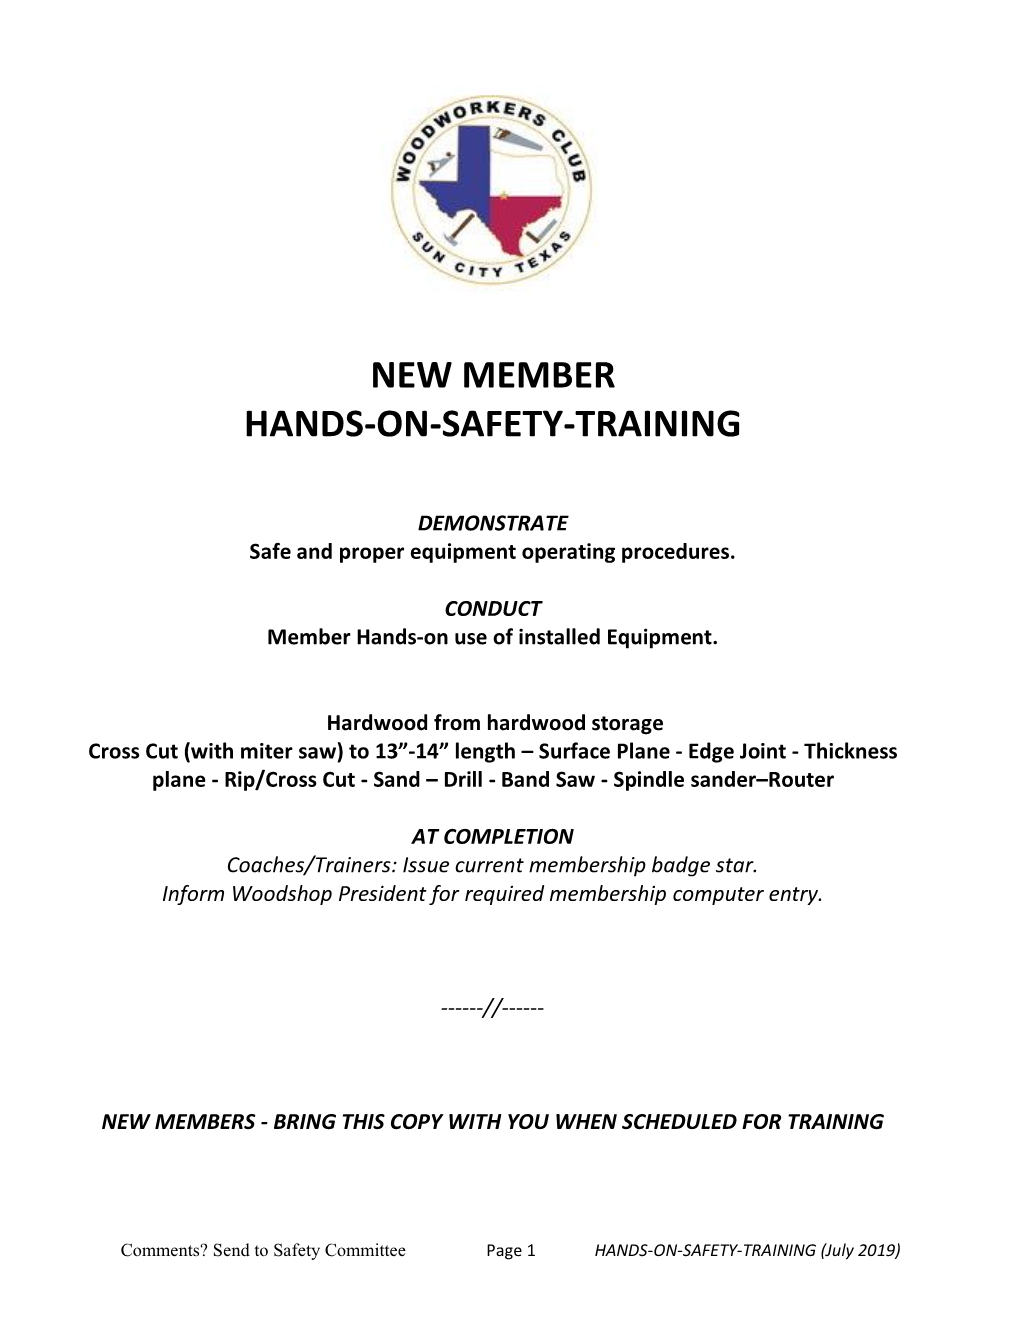 New Member Hands-On-Safety-Training